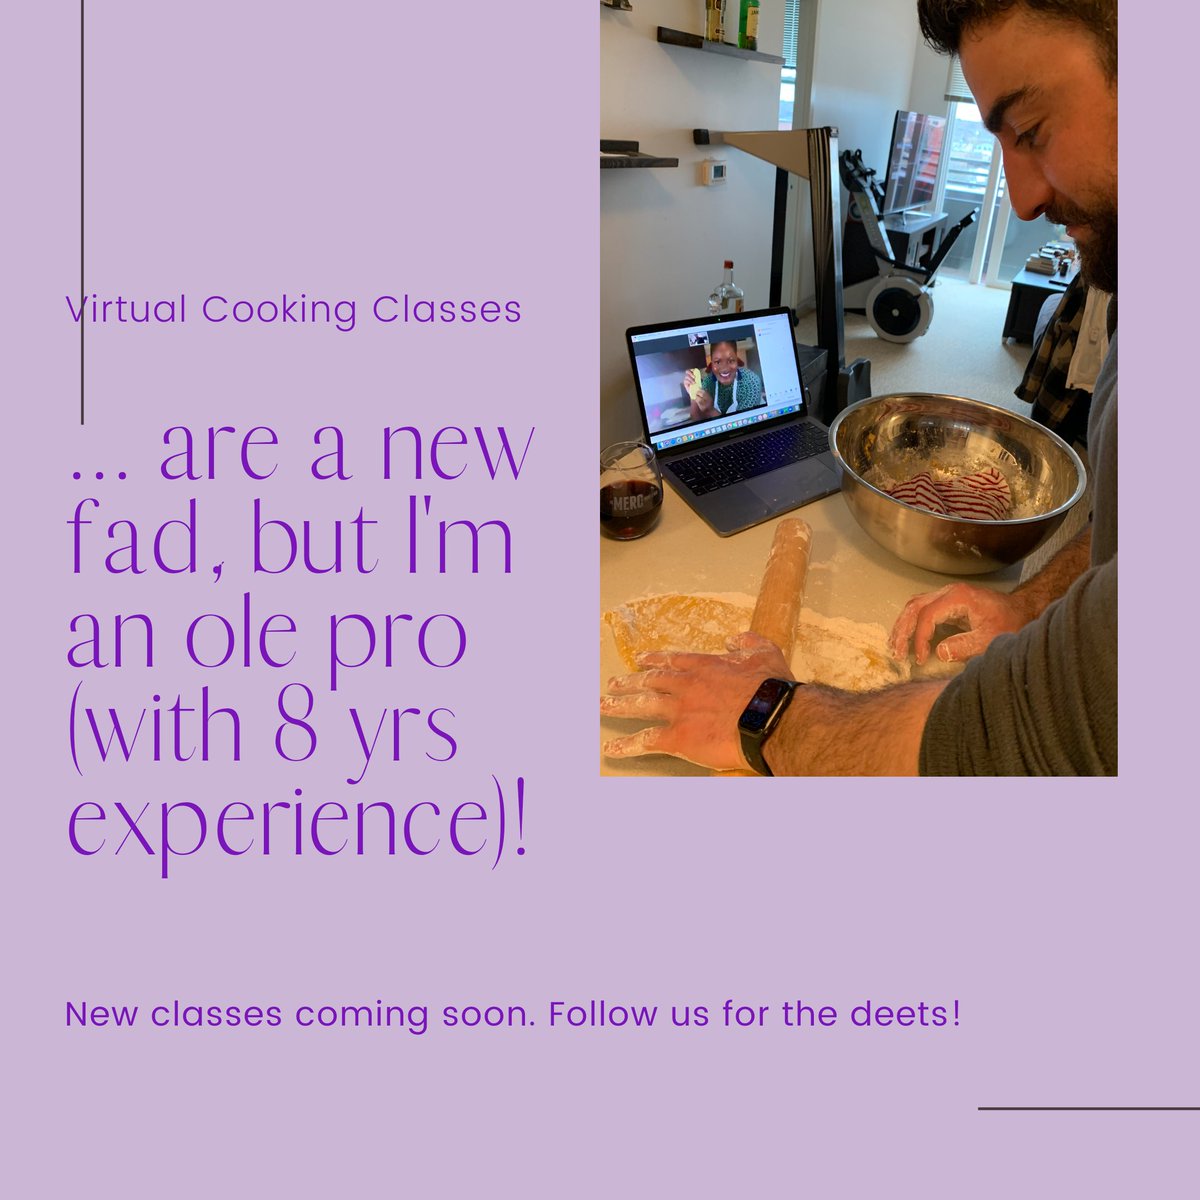 Let's cook together! #culinarykisses #ChefAngelaMichelle #howtocook #learntocook #cookathome #cookingathome #cookingfromhome #stayhomeactivities #coronacooking #covidcooking #virtualcookingclass #virtualcookingclasses #quarantineactivities #quarantinecooking #quarantinekitchen